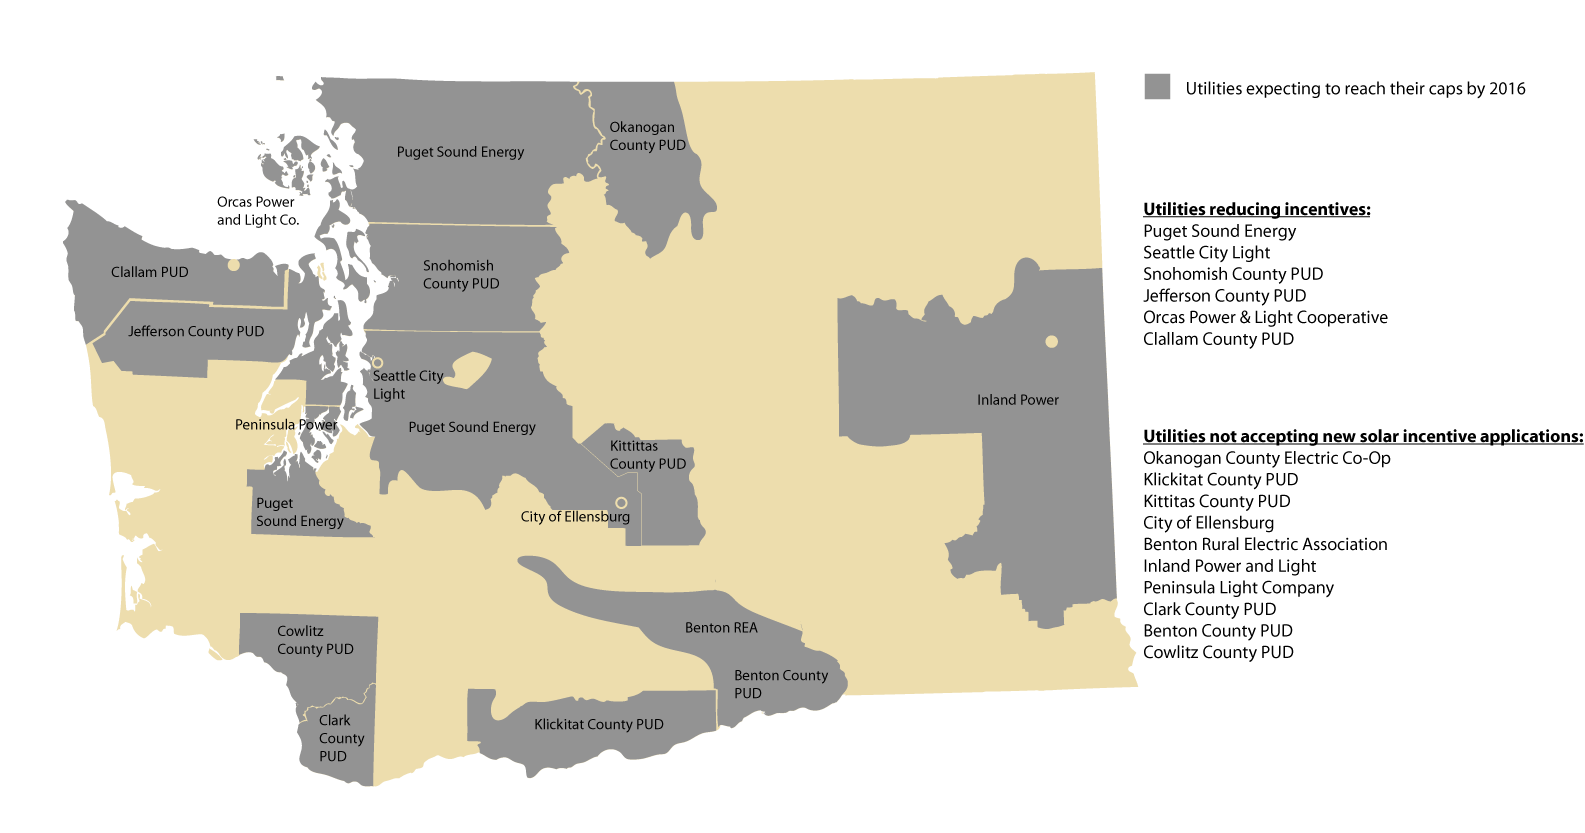 Map of Washington state shows the service territories of the 16 utilities that expect to reach their caps in 2016.